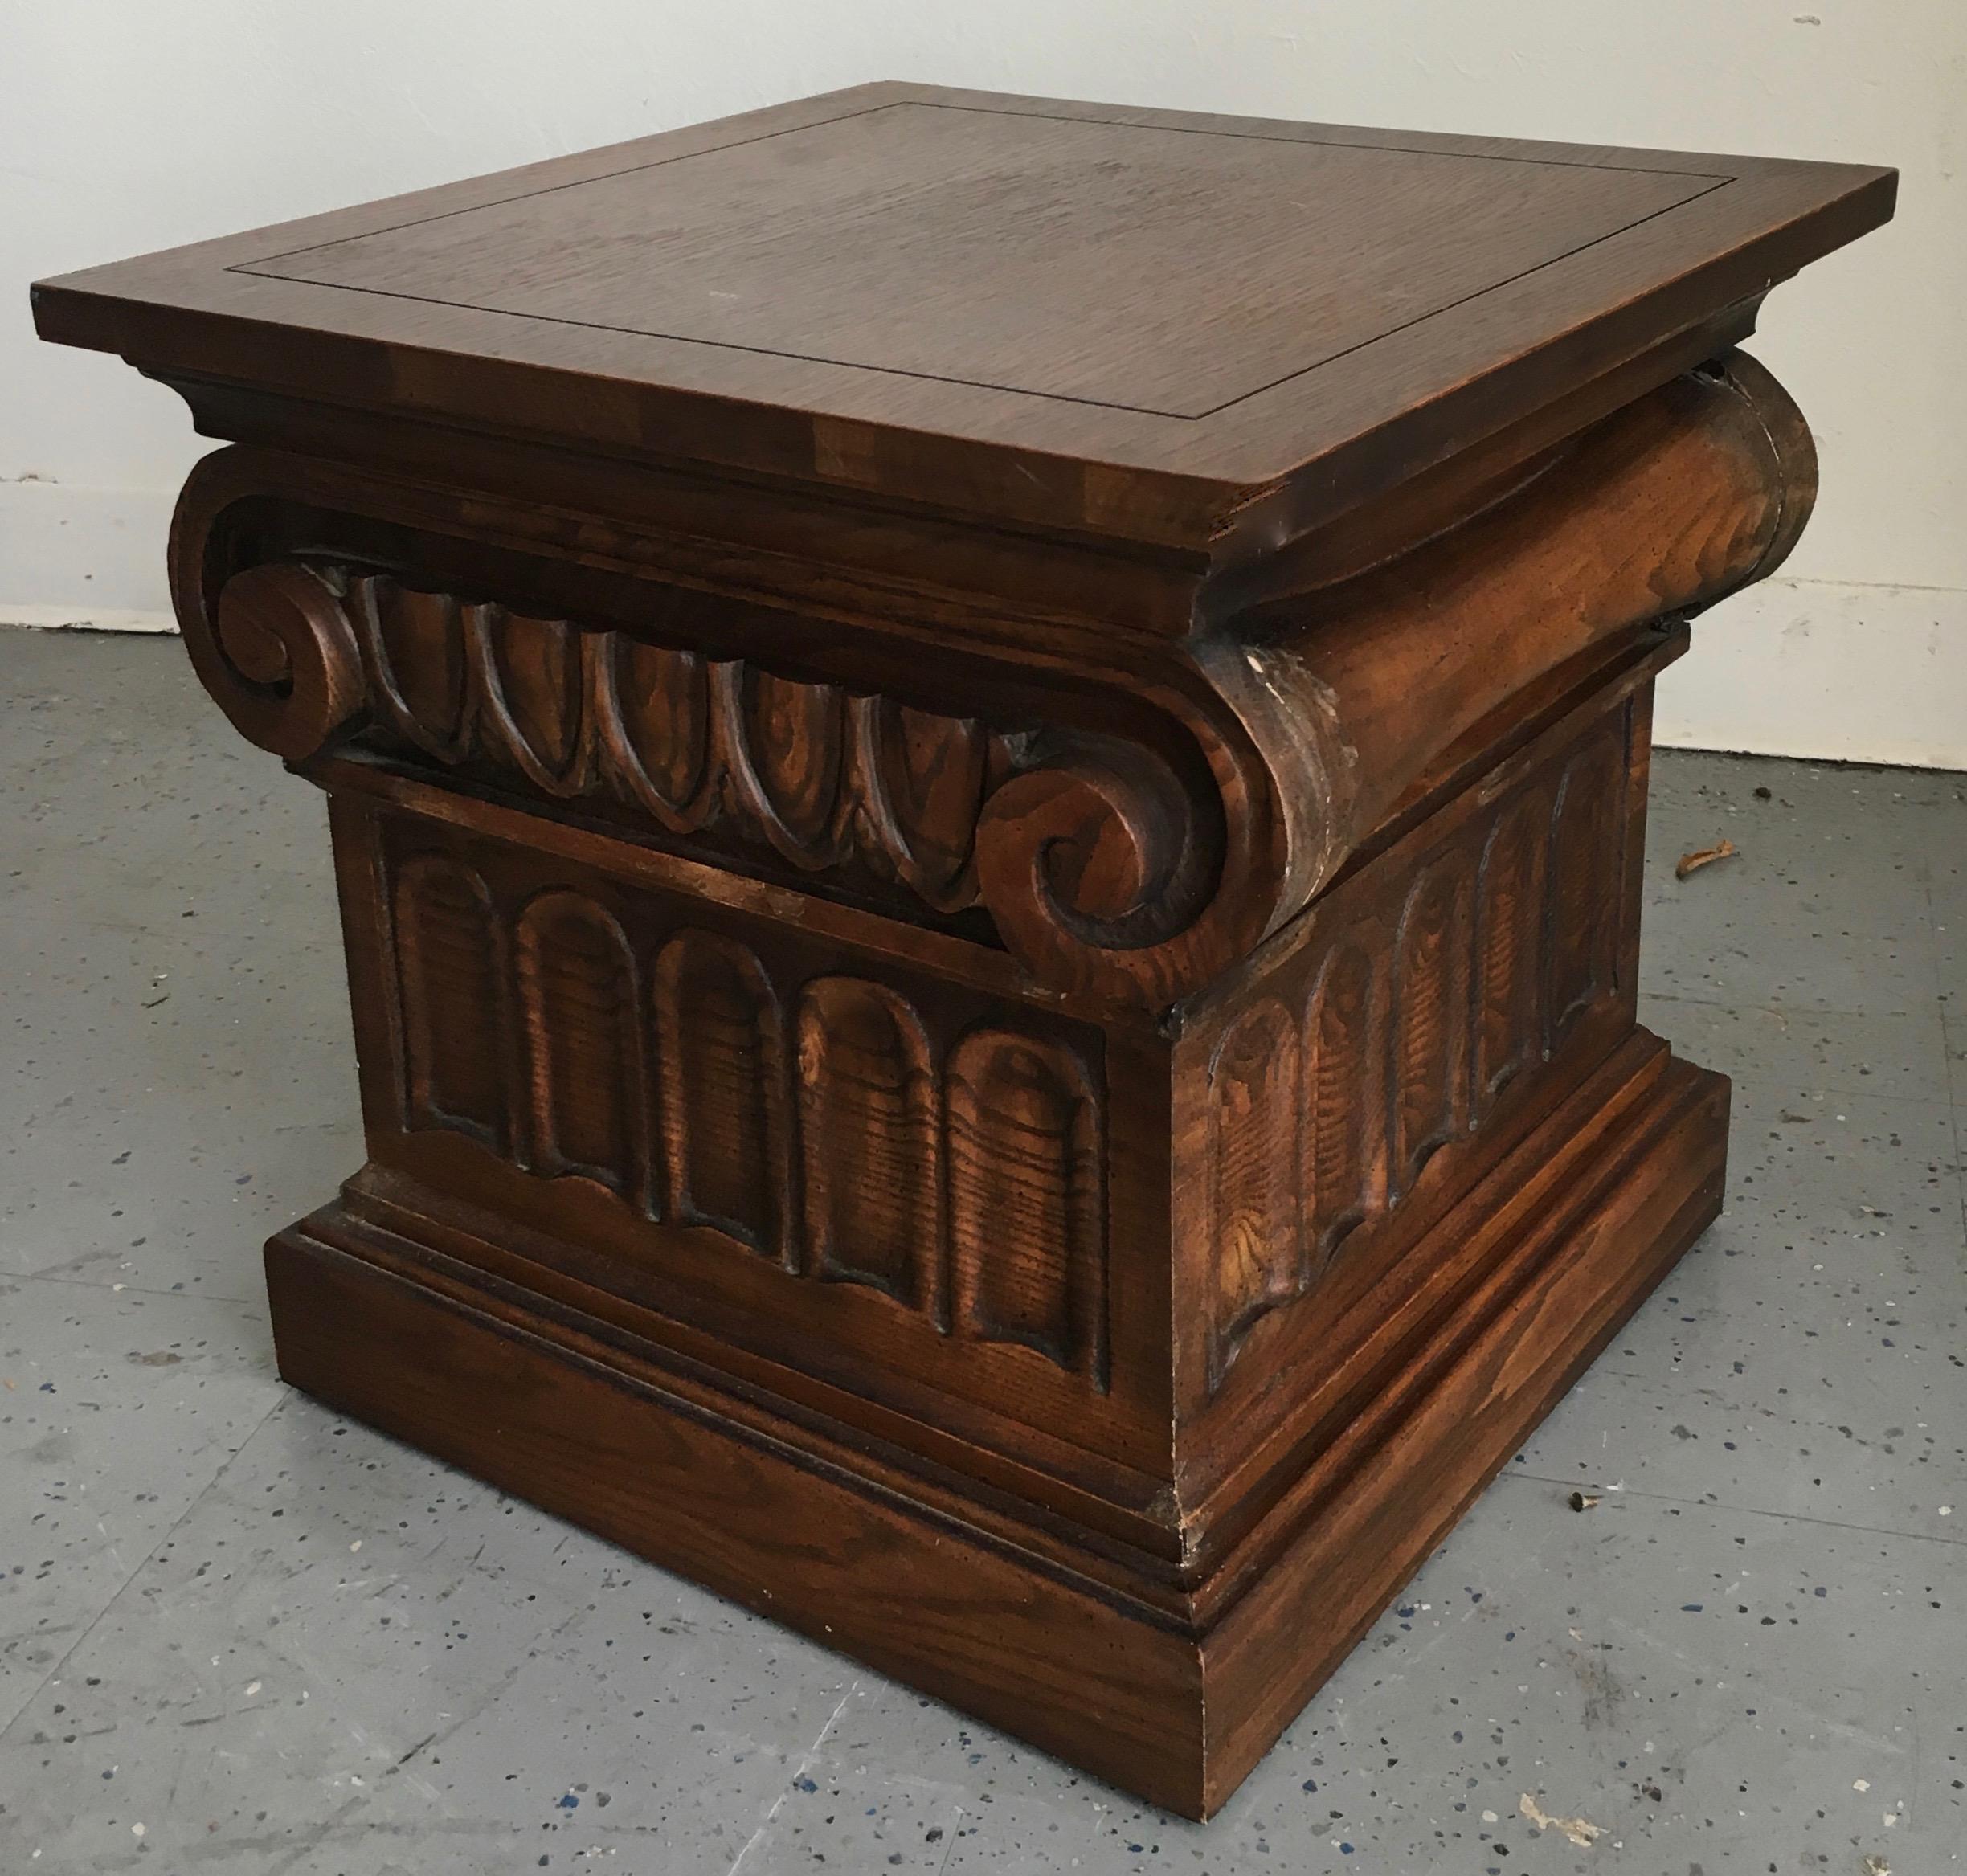 Simple and handsome dark wood side / cigar table with ionic column carved relief - perfect for any room, from den - child’s room or covered outdoor area. The piece can be used as a table or additional seating - with a square cushion a great and